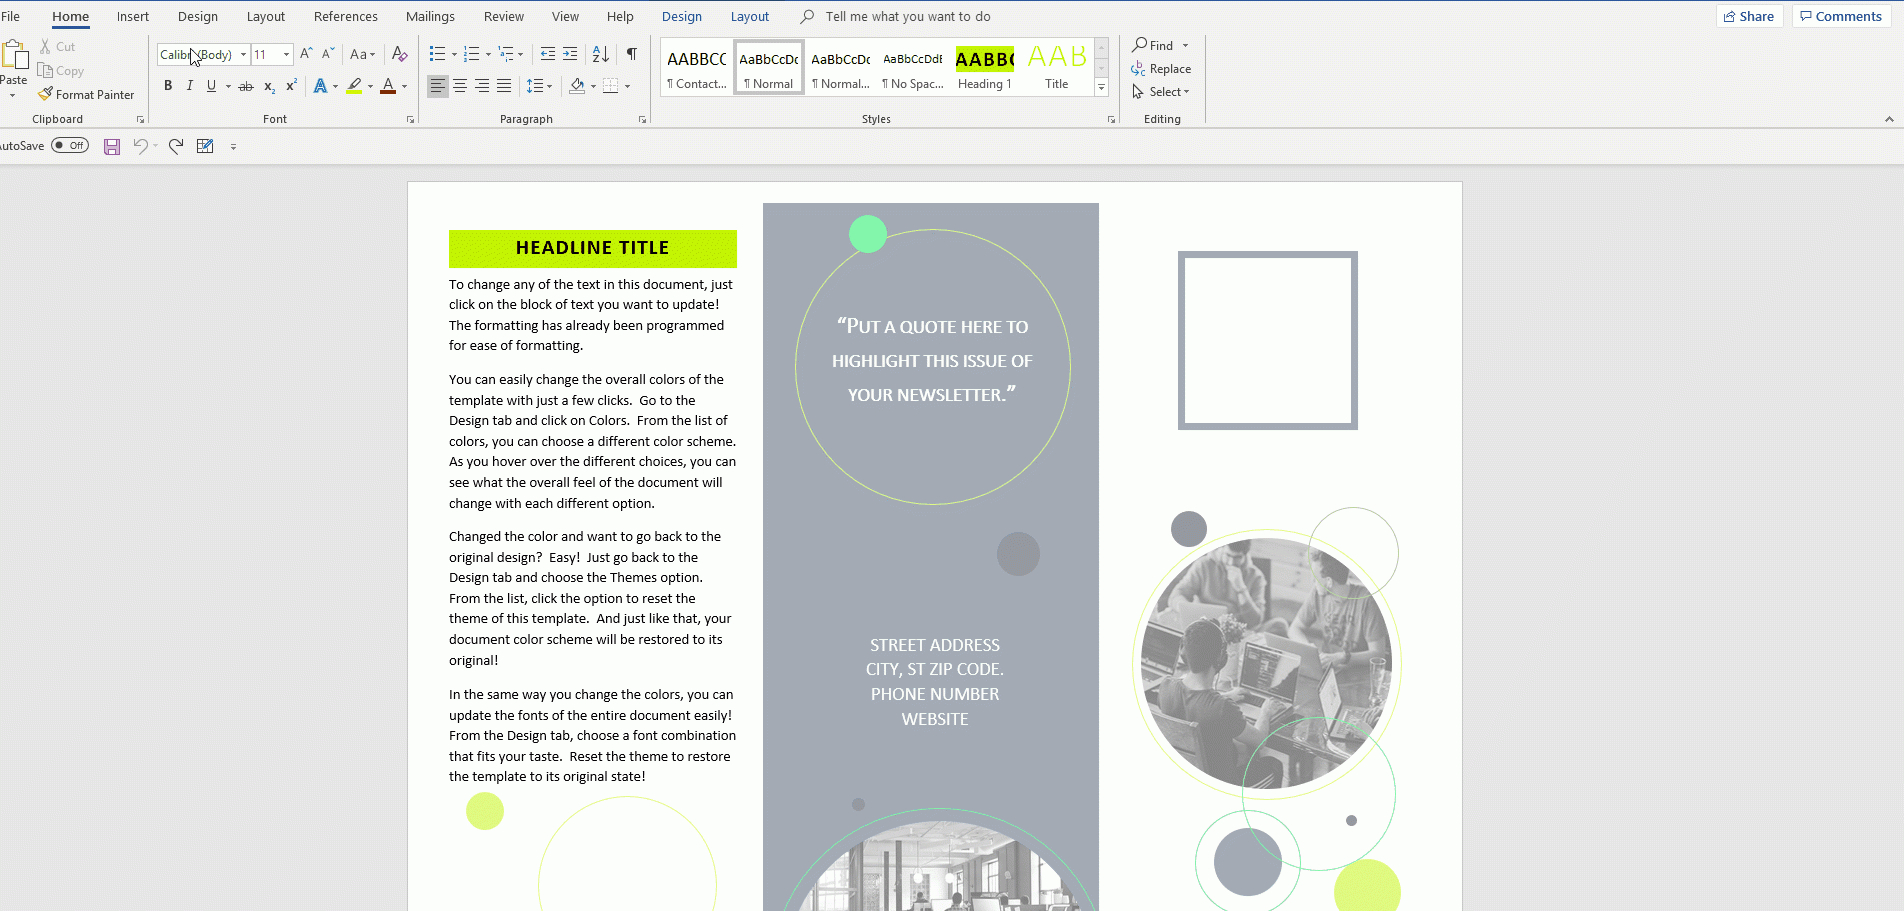 How To Make A Brochure On Microsoft Word – Pce Blog Throughout Brochure Templates For Word 2007